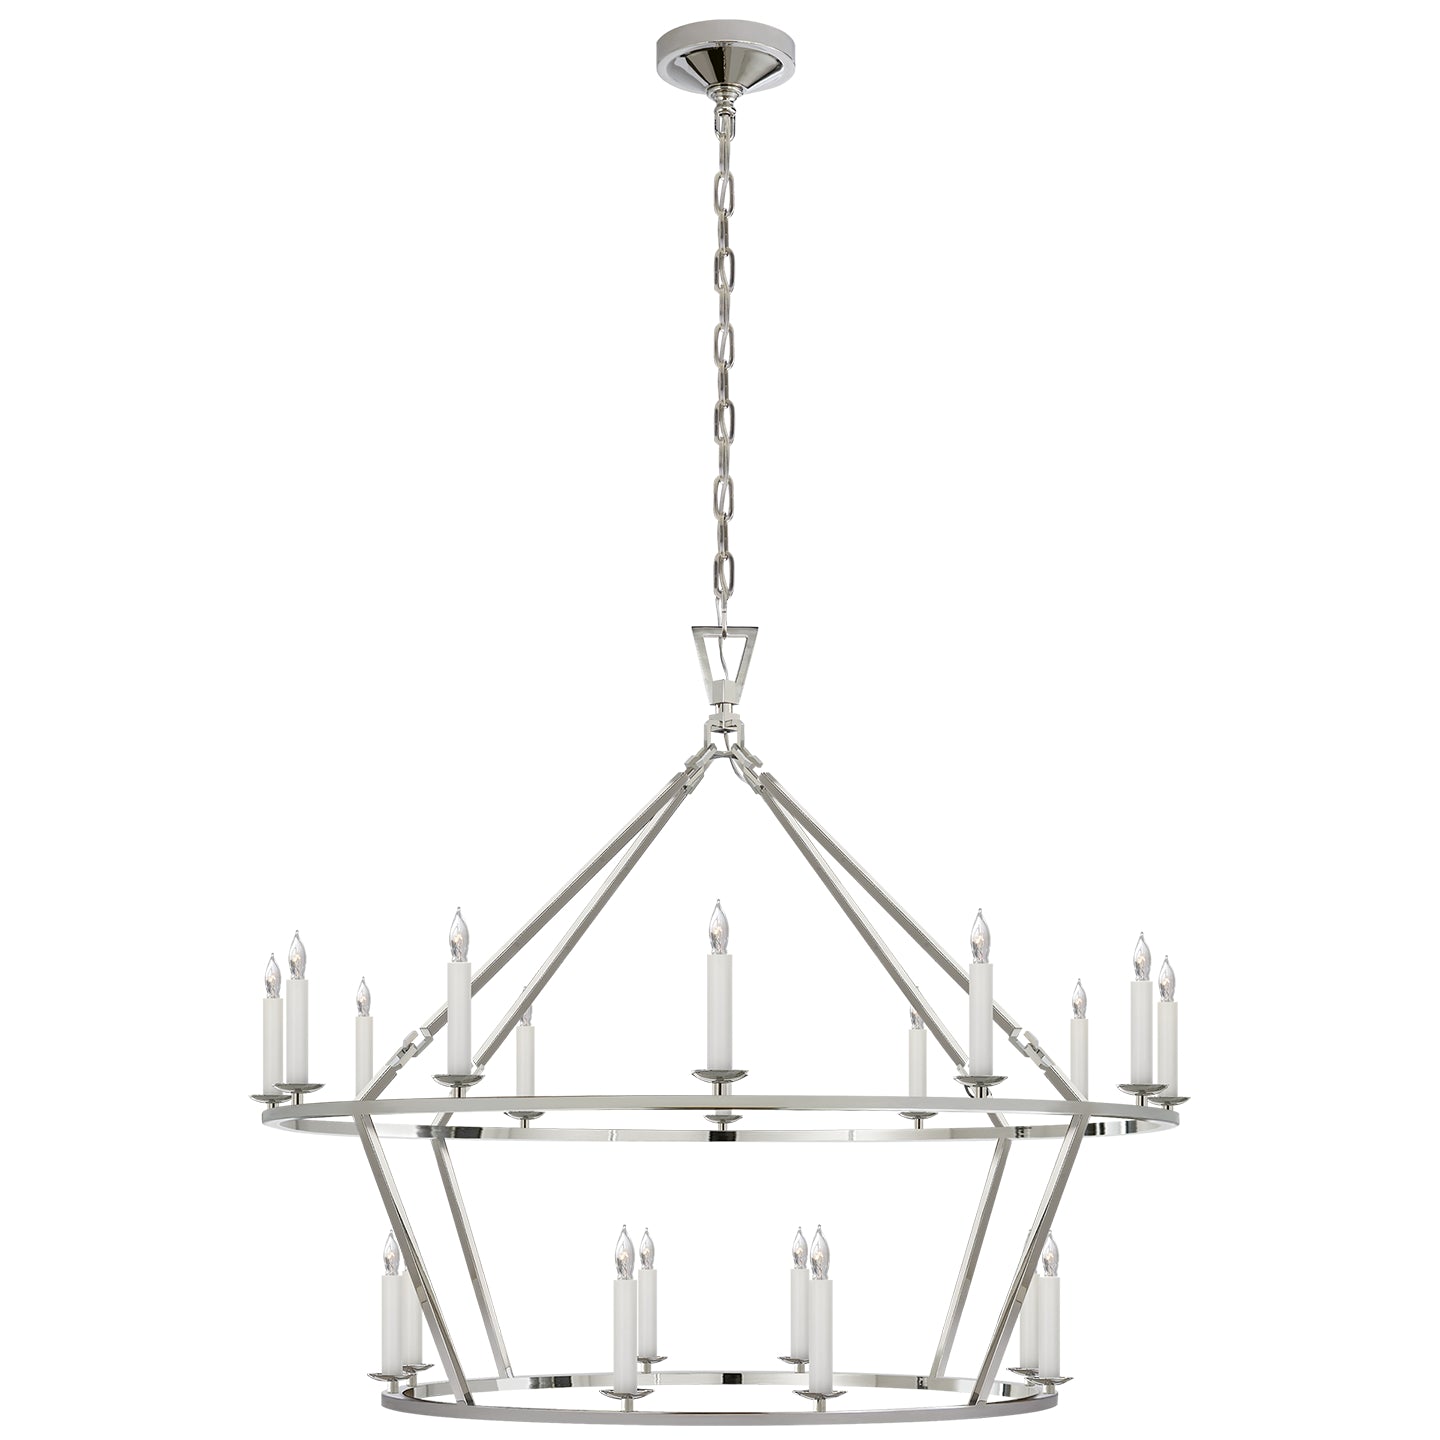 Load image into Gallery viewer, Visual Comfort Signature - CHC 5179PN - 20 Light Chandelier - Darlana Ring - Polished Nickel
